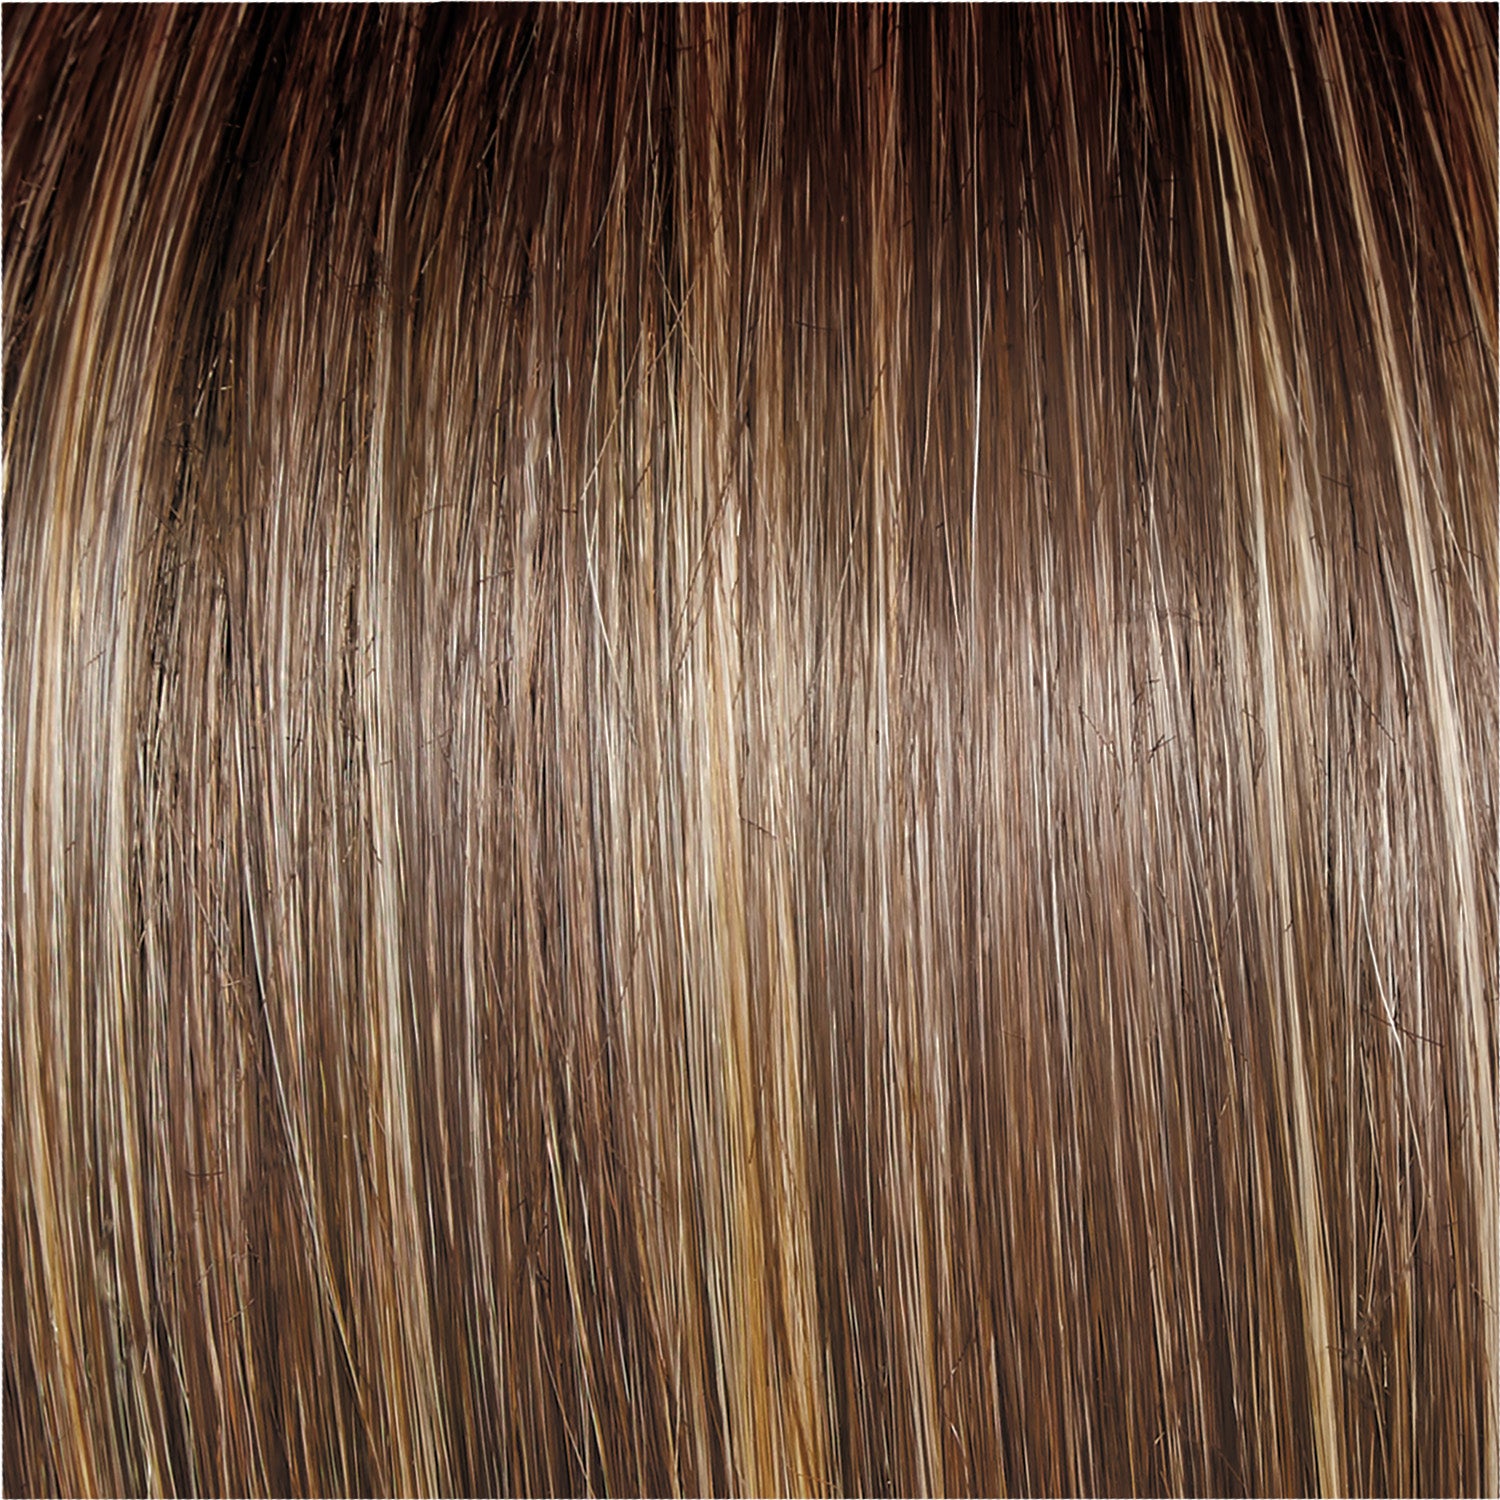 Captivating Canvas | Synthetic Lace Front Wig (Lace Part) - Raquel Welch